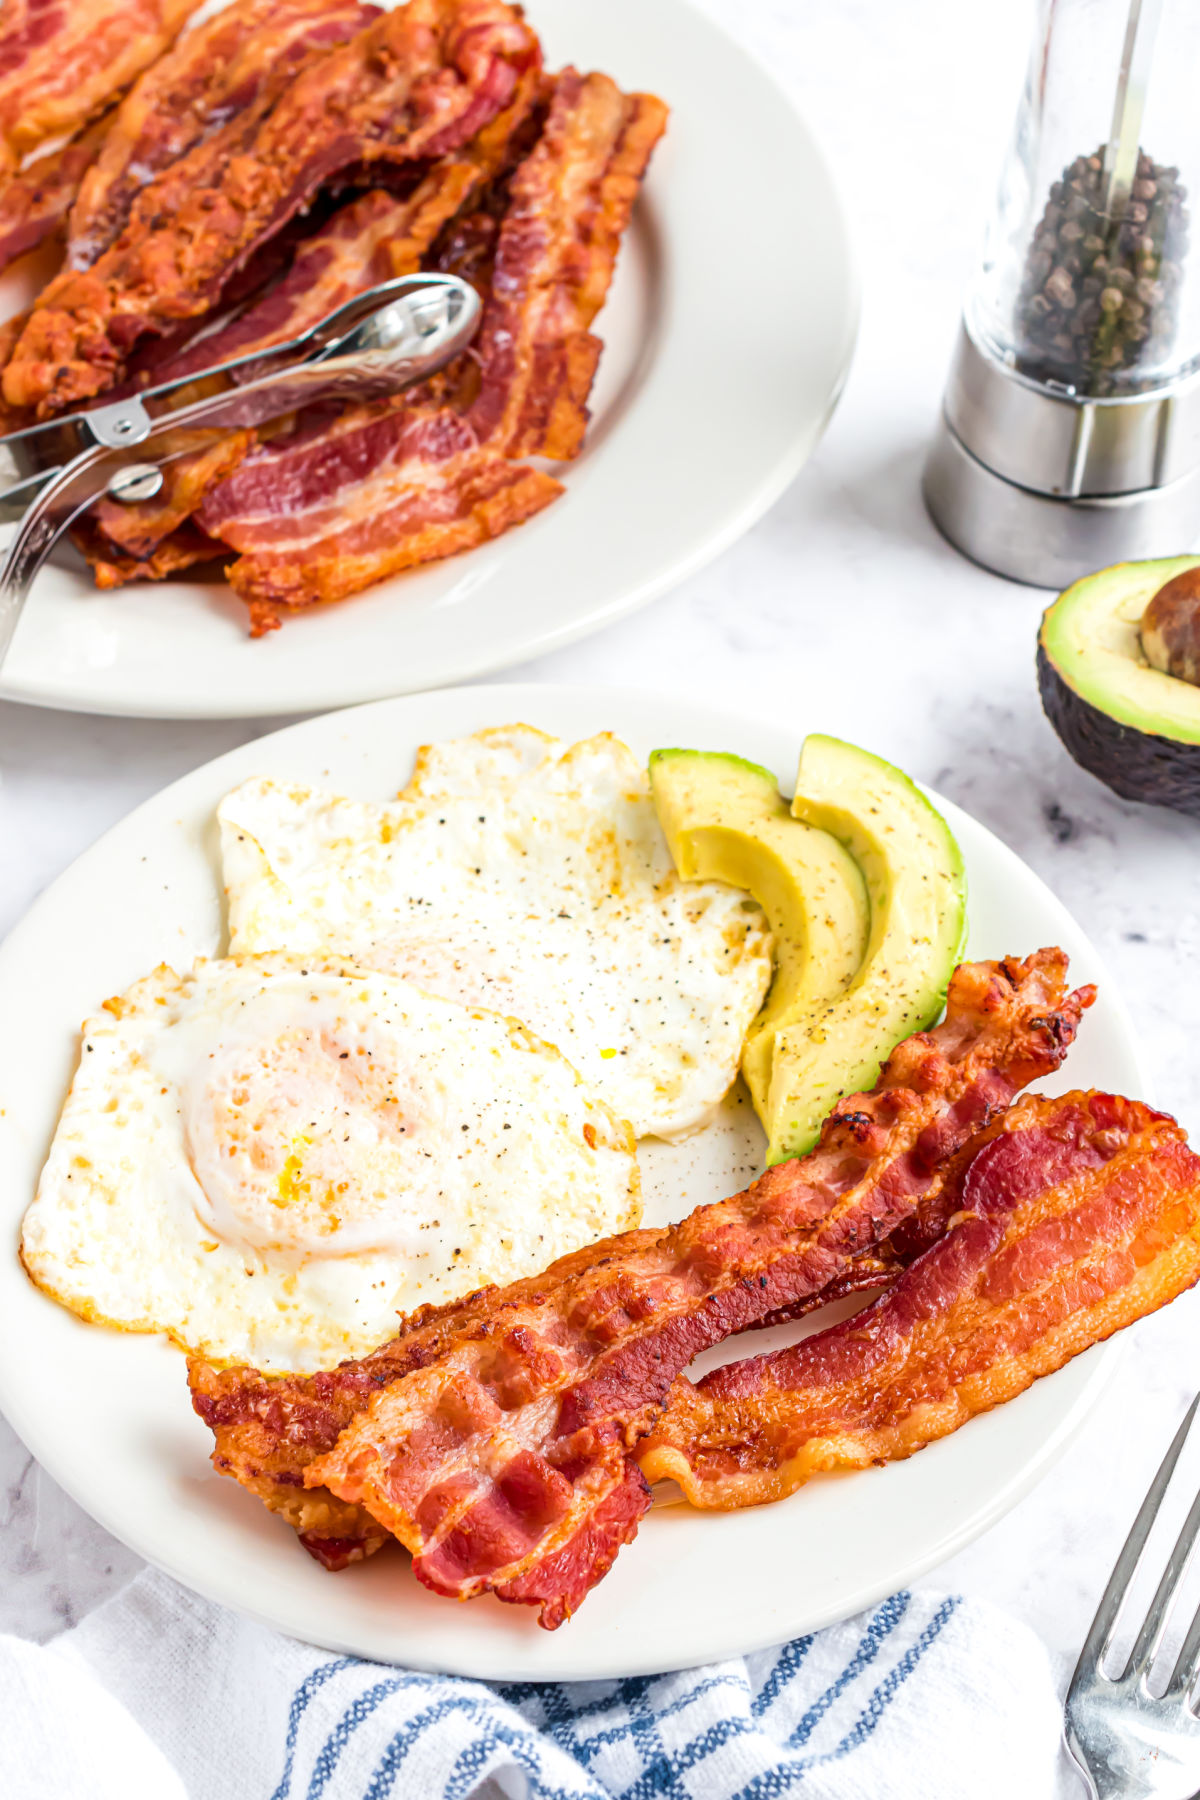 Cooked bacon with fried eggs on a plate.